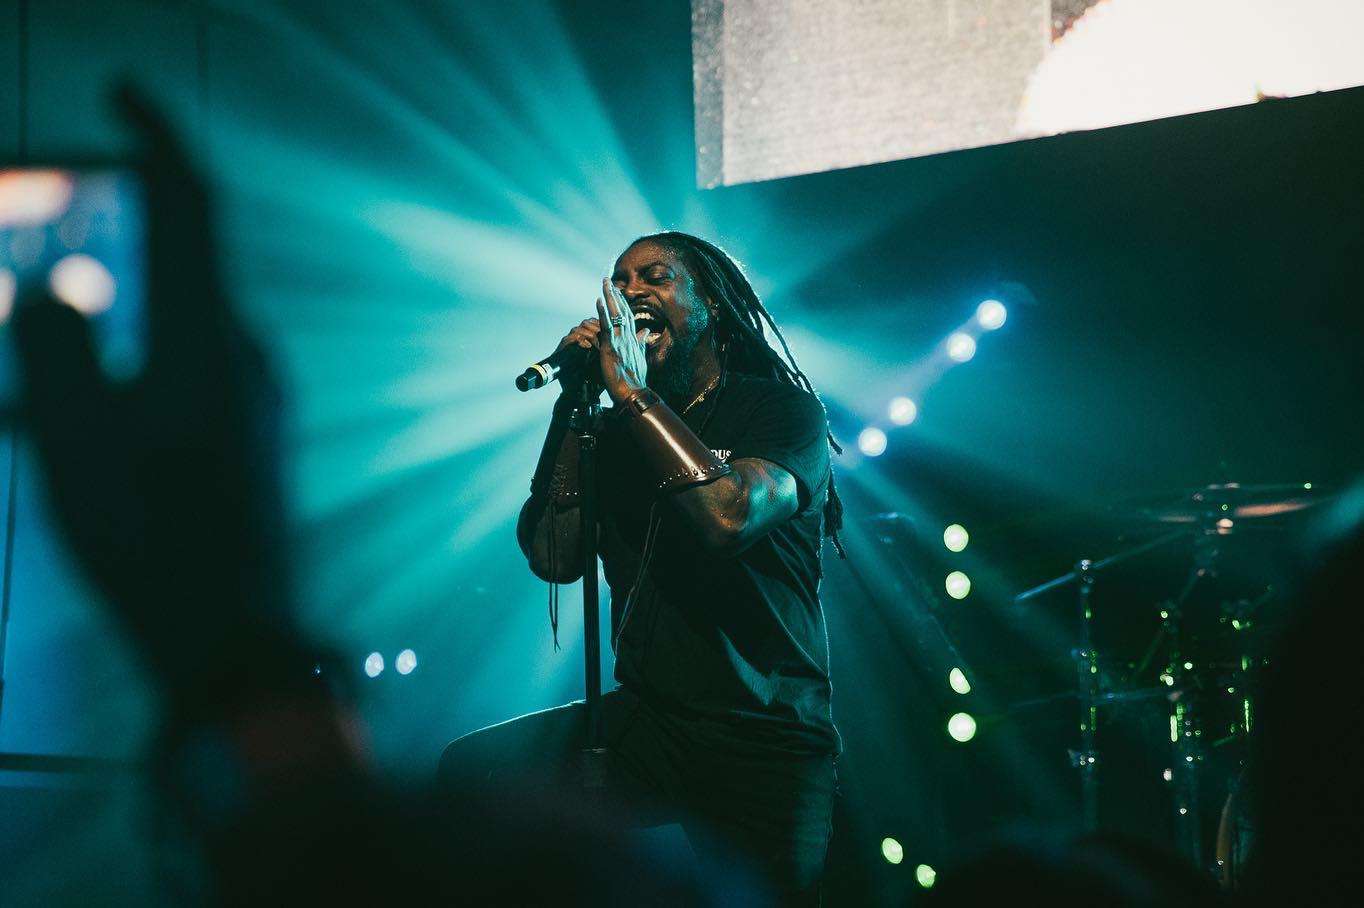 image showing ITAP of the lead singer of Sevendust